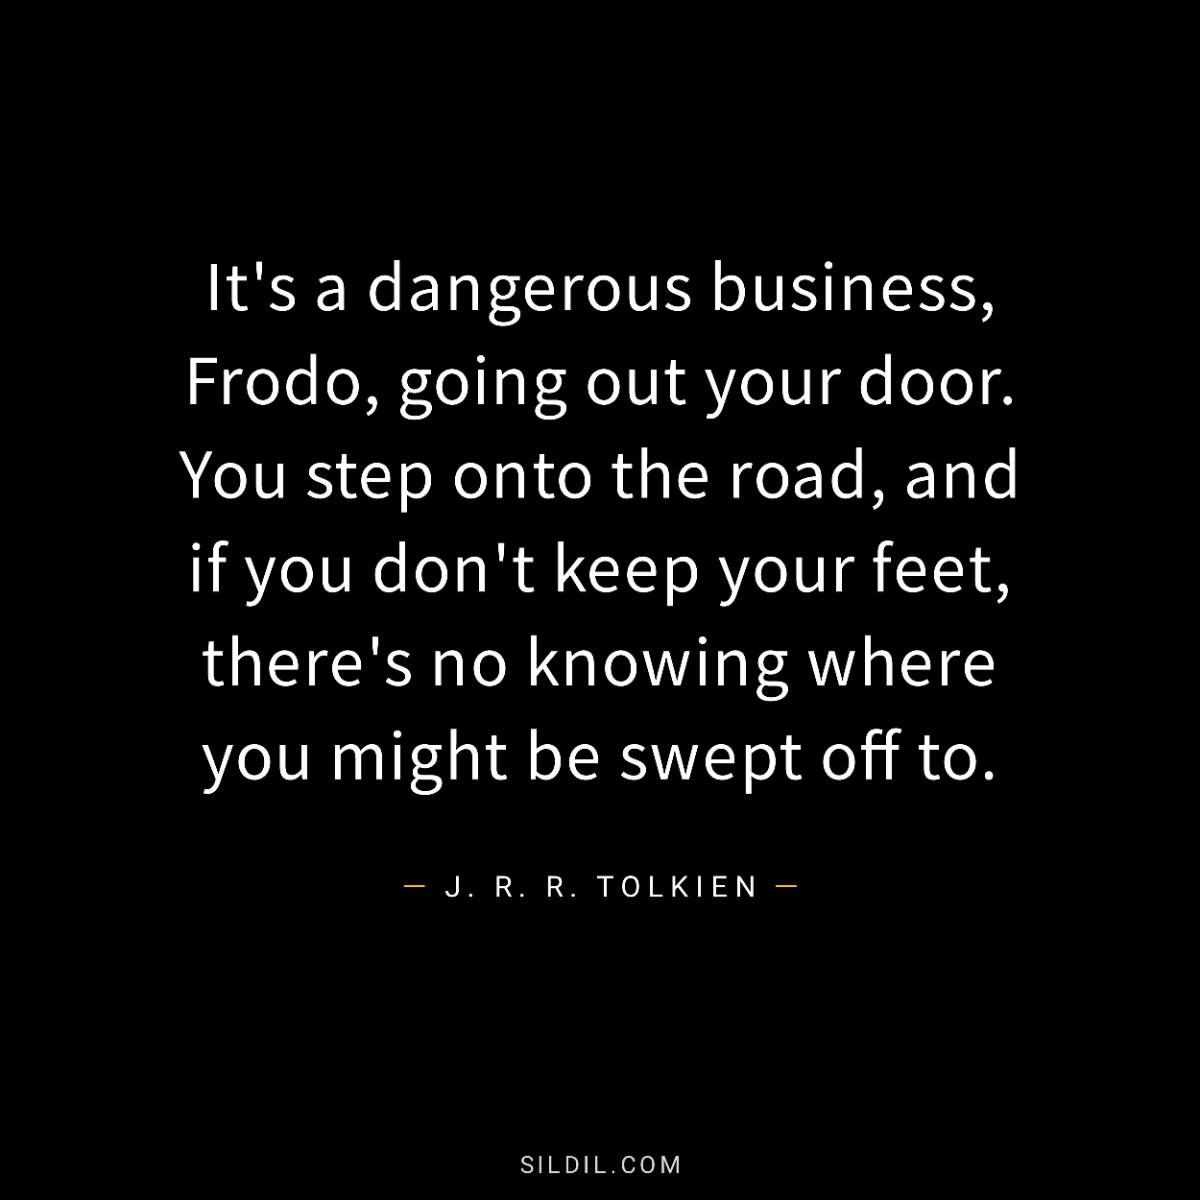 It's a dangerous business, Frodo, going out your door. You step onto the road, and if you don't keep your feet, there's no knowing where you might be swept off to.